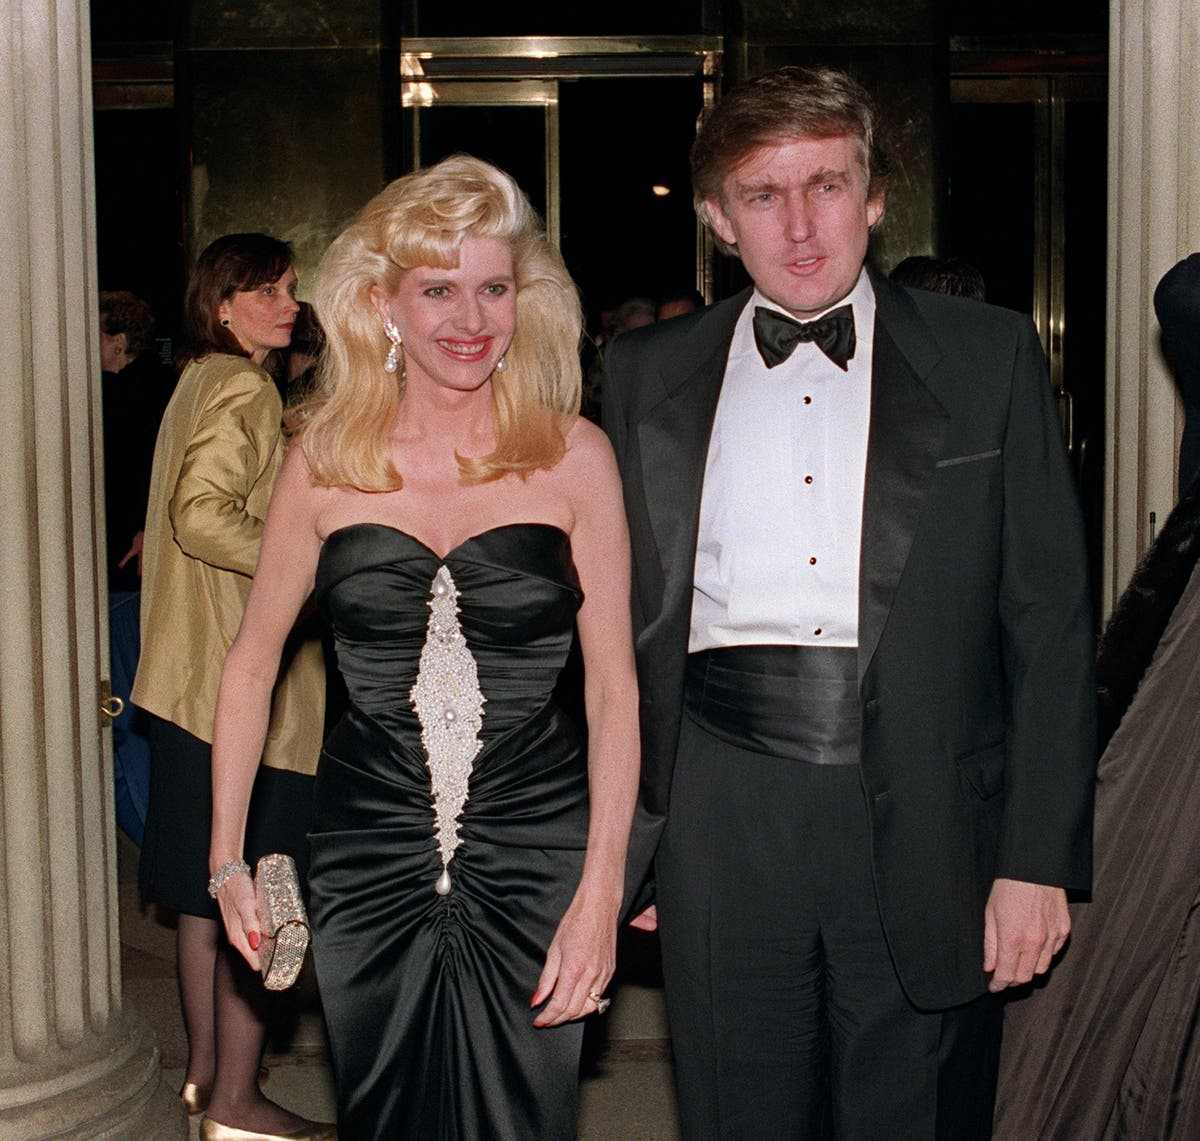 Newly released secret FBI files reveal confusion over Ivana Trump’s immigration status